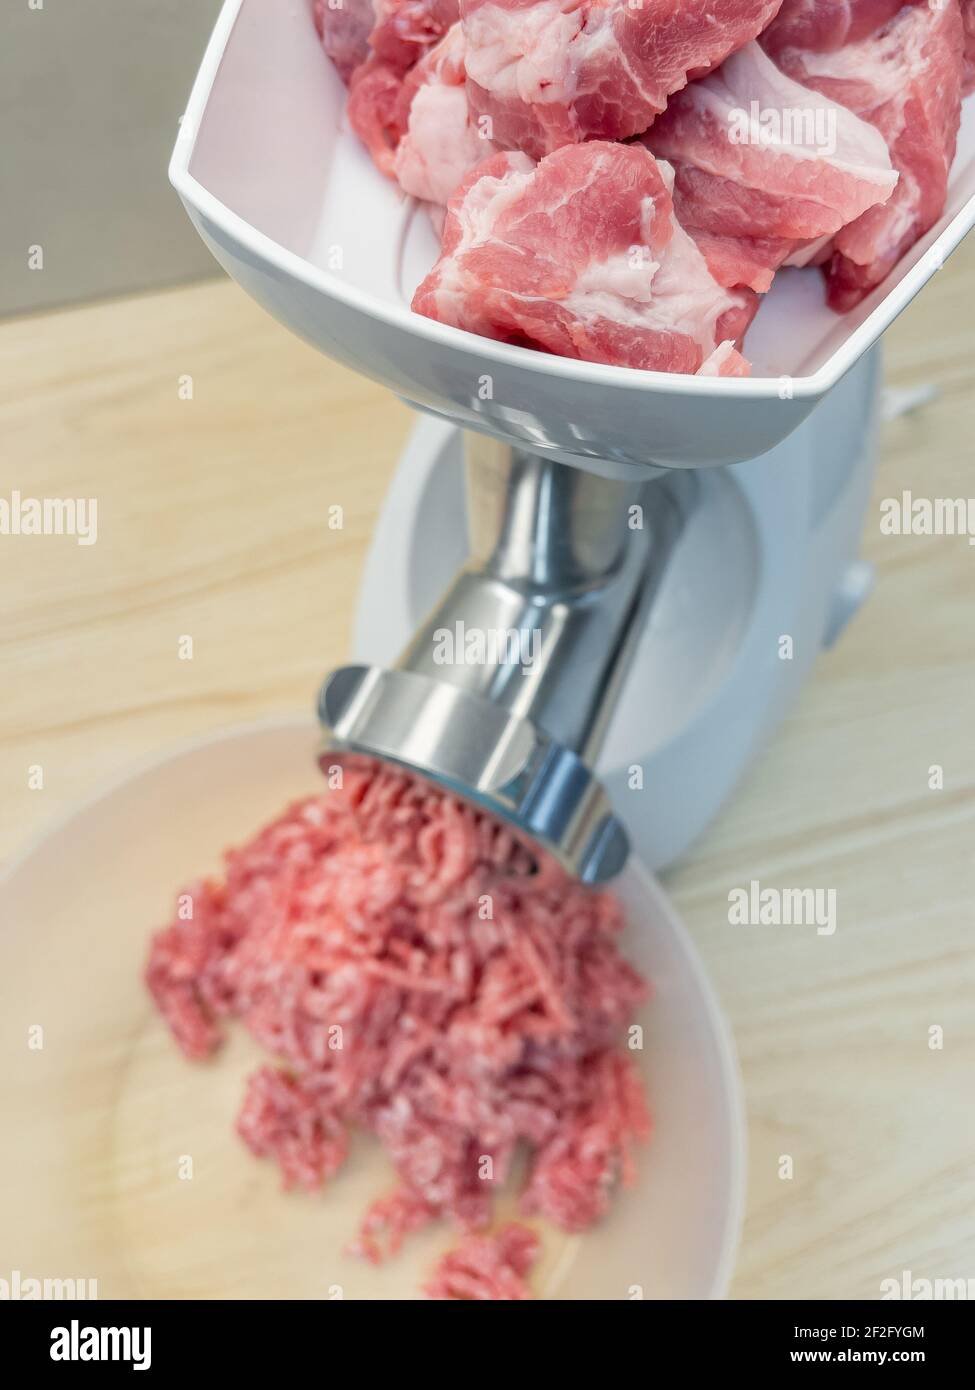 Meat grinder. Making homemade raw minced meat at kitchen. Close up of fatty  pork minced Stock Photo - Alamy